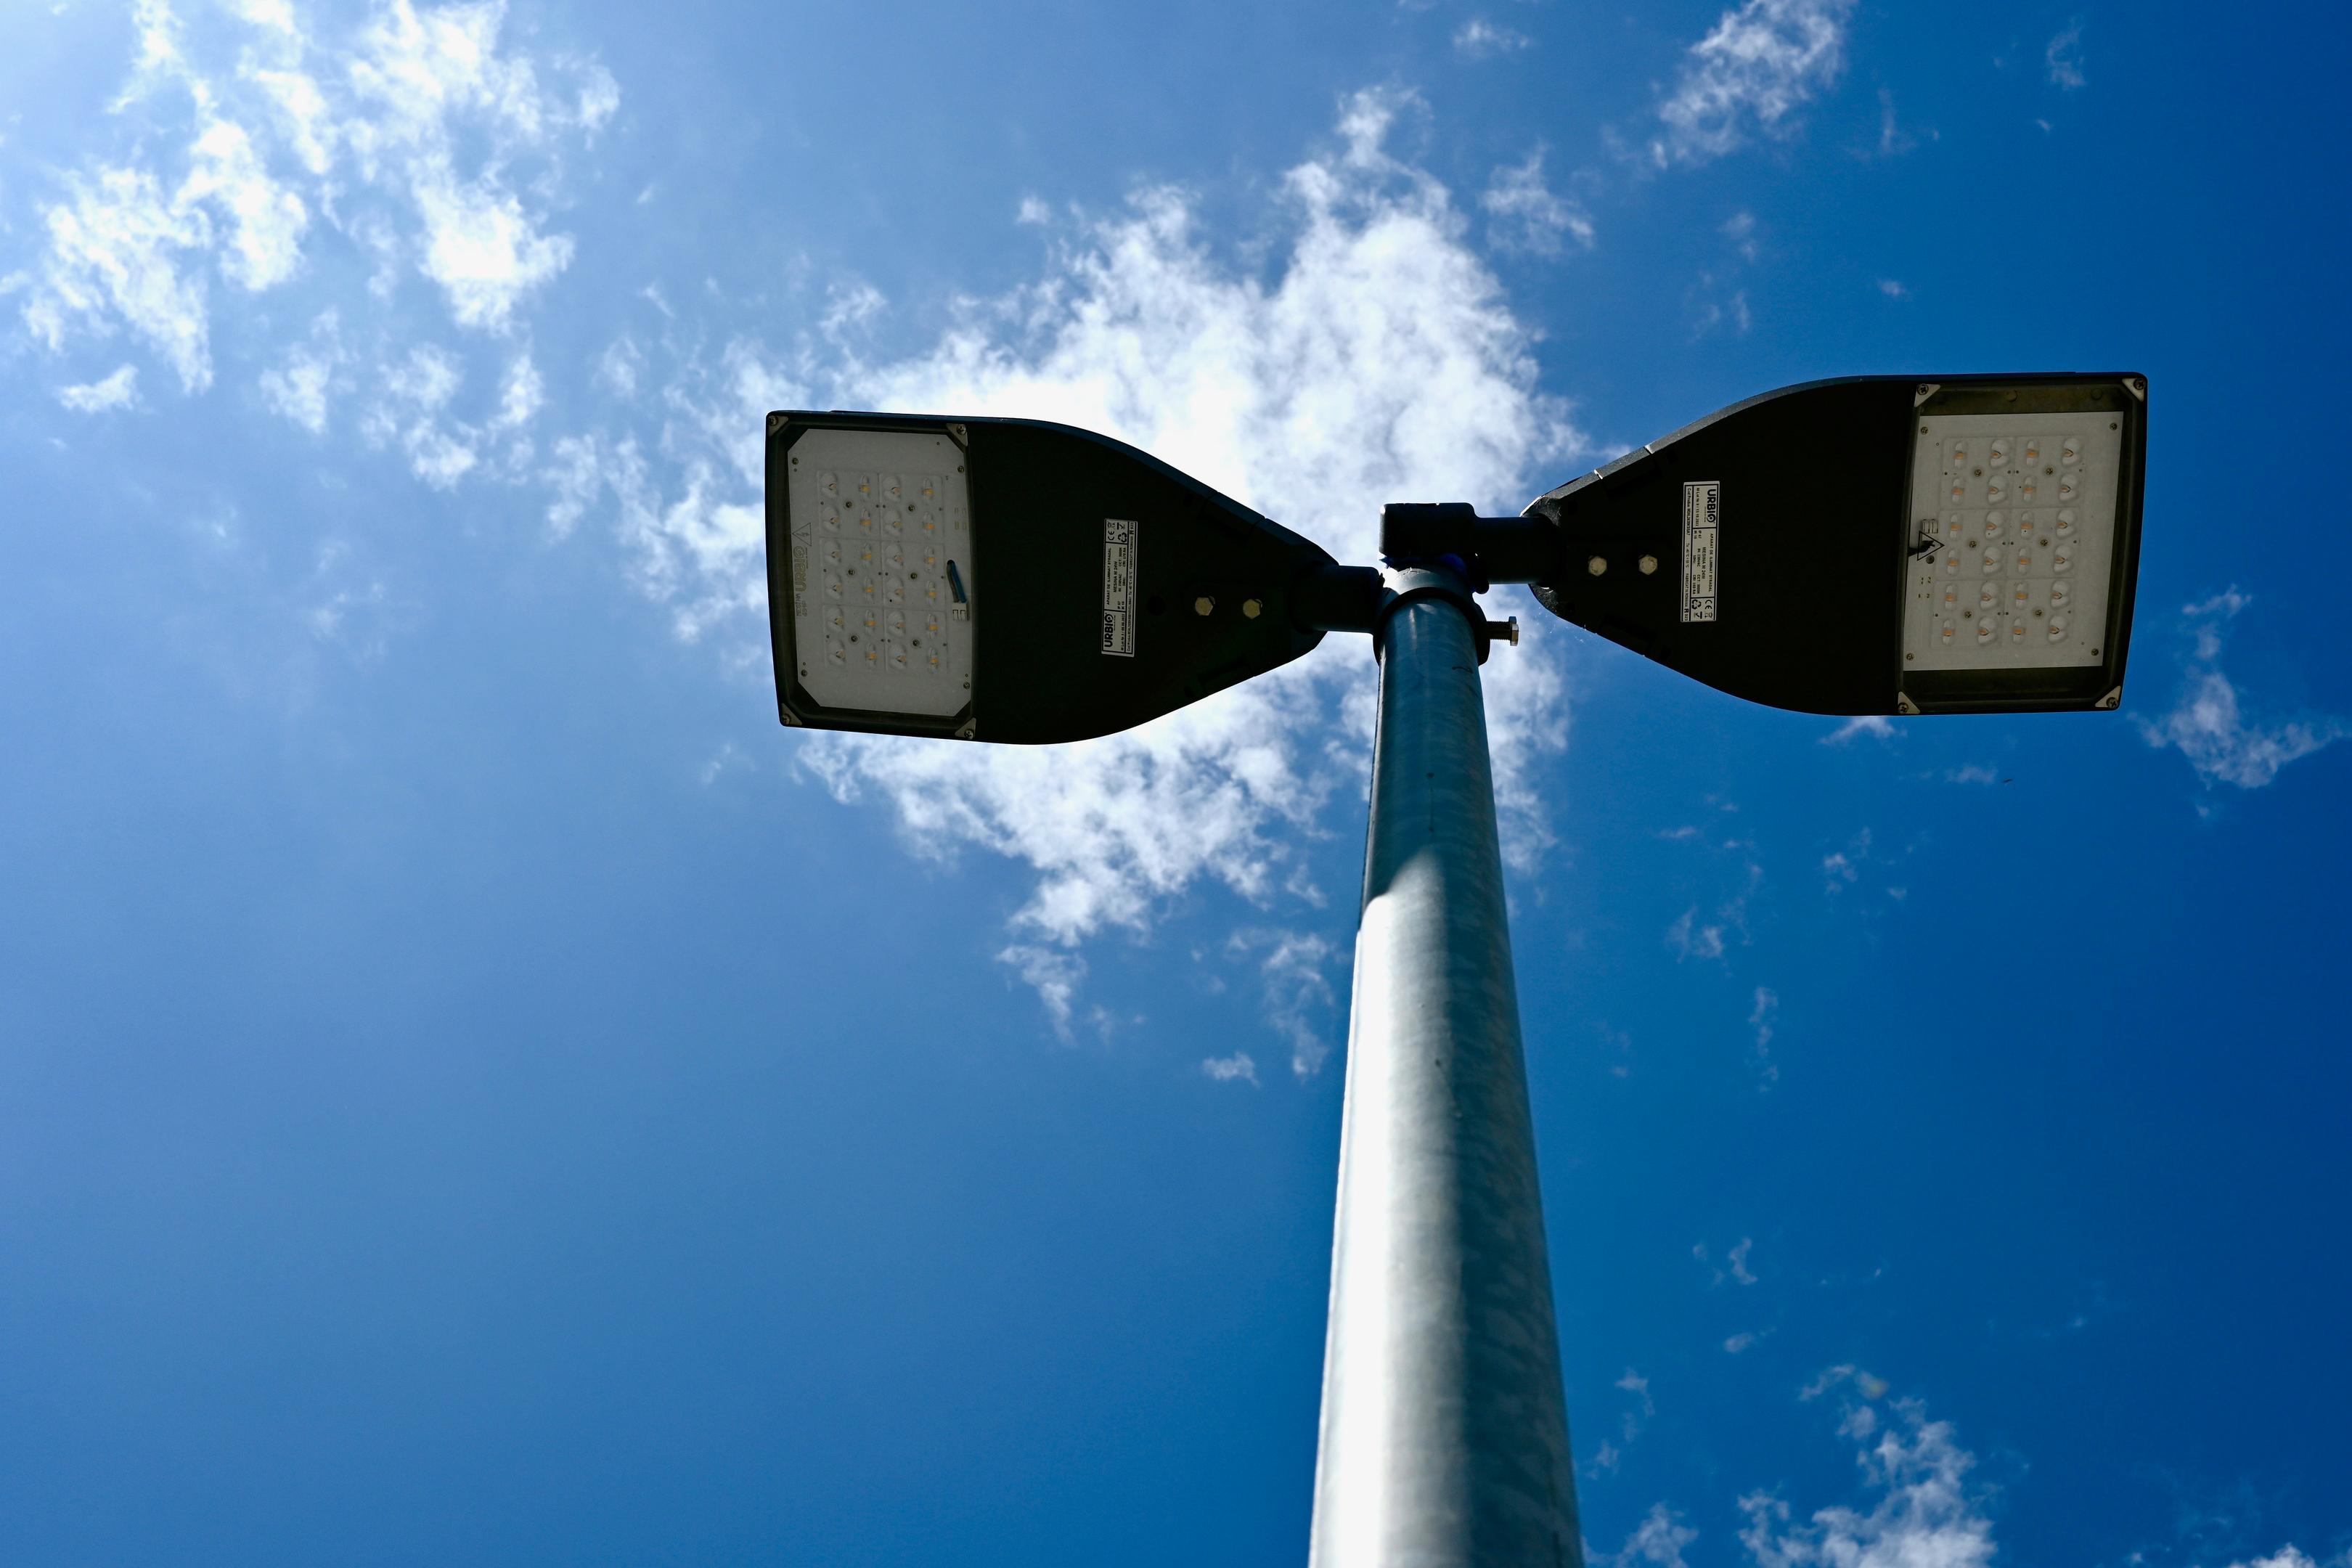 A picture of the street lightning from down below looking up underneath the street lightning, enabling us to see the LED technology used in the street lightening